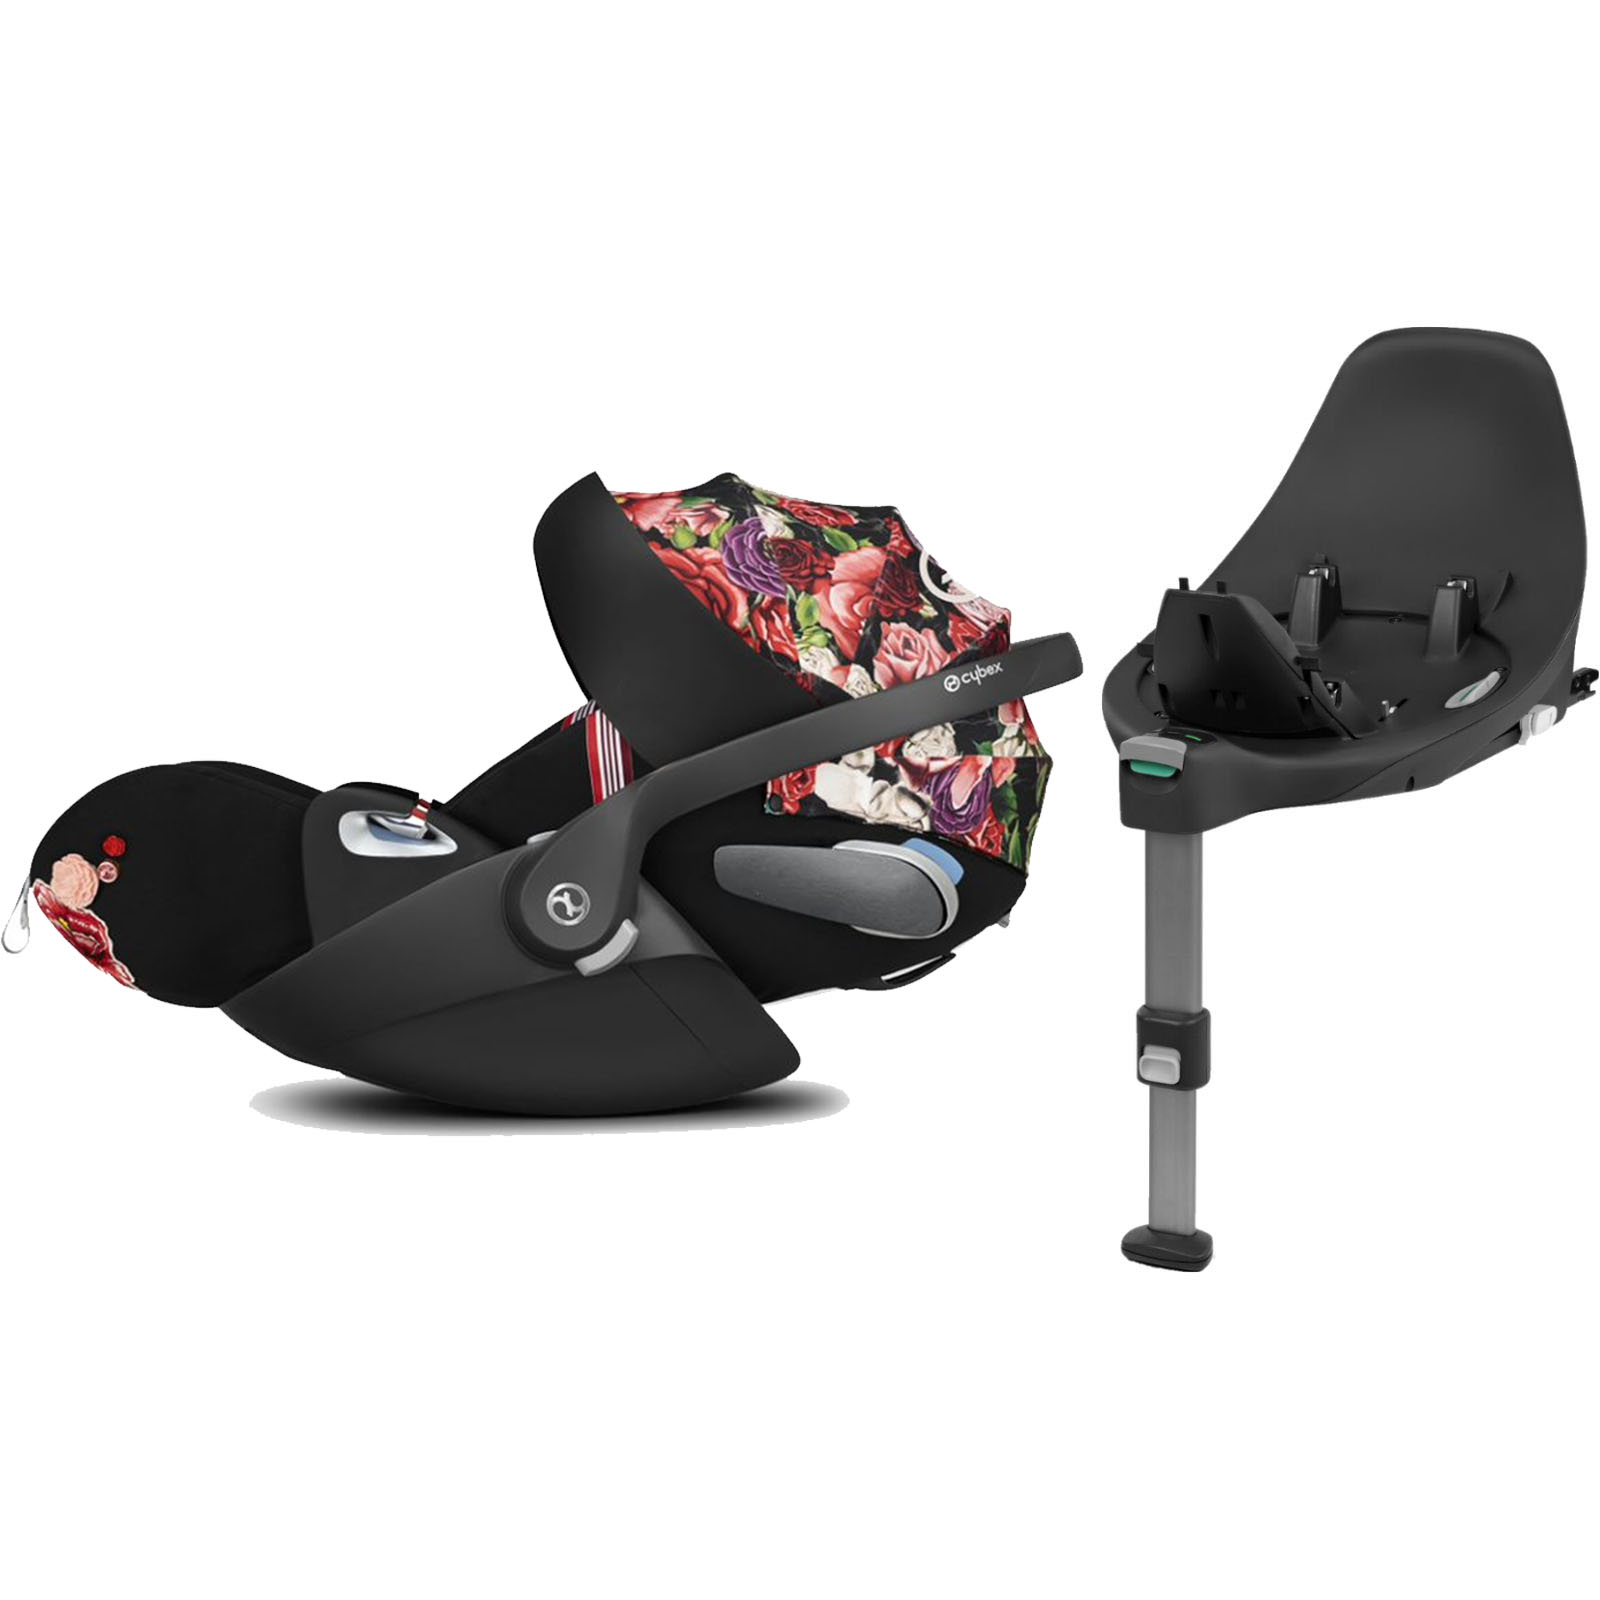 Cybex Cloud Z i-Size Lie-Flat Infant Car Seat with ISOFIX Base - Spring Blosson Fashion Edition Black